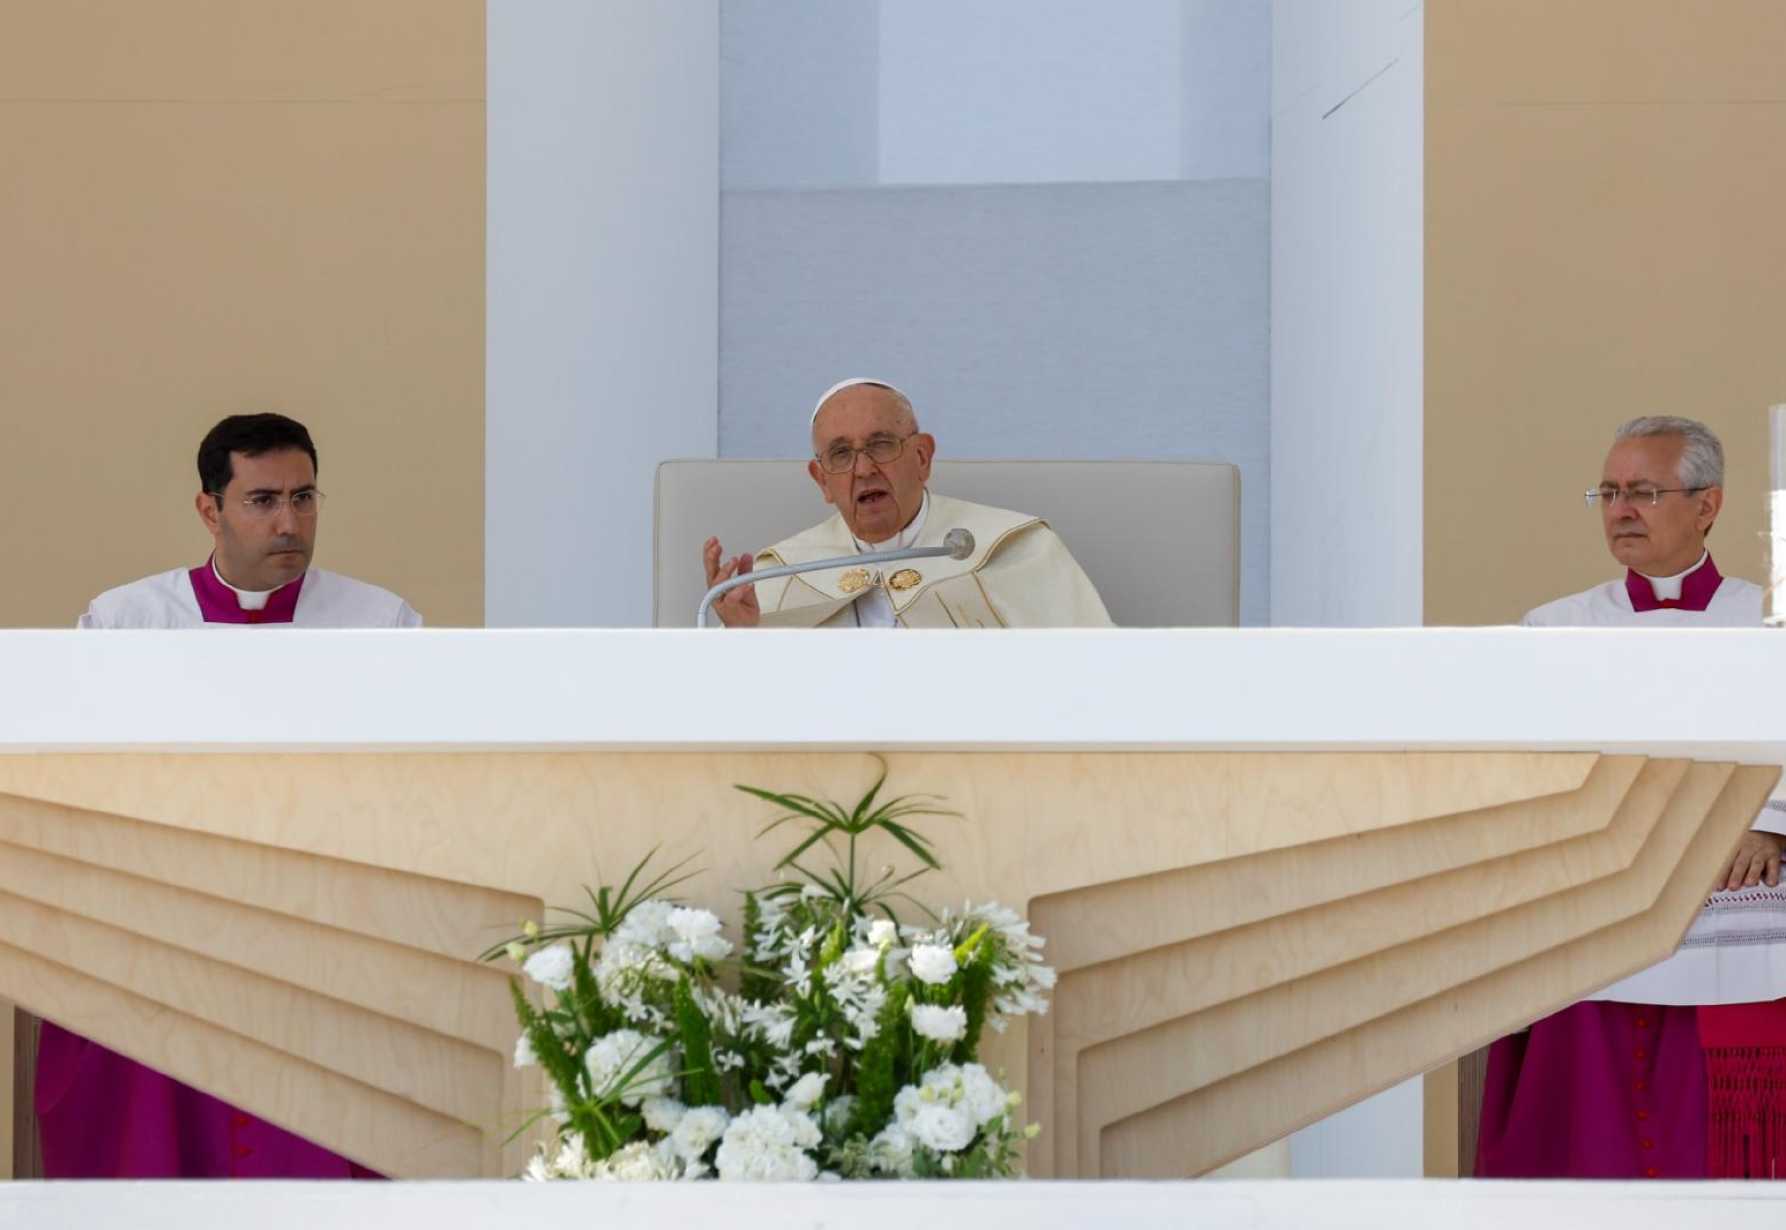 Don't be afraid to change the world, pope tells youths at WYD closing Mass